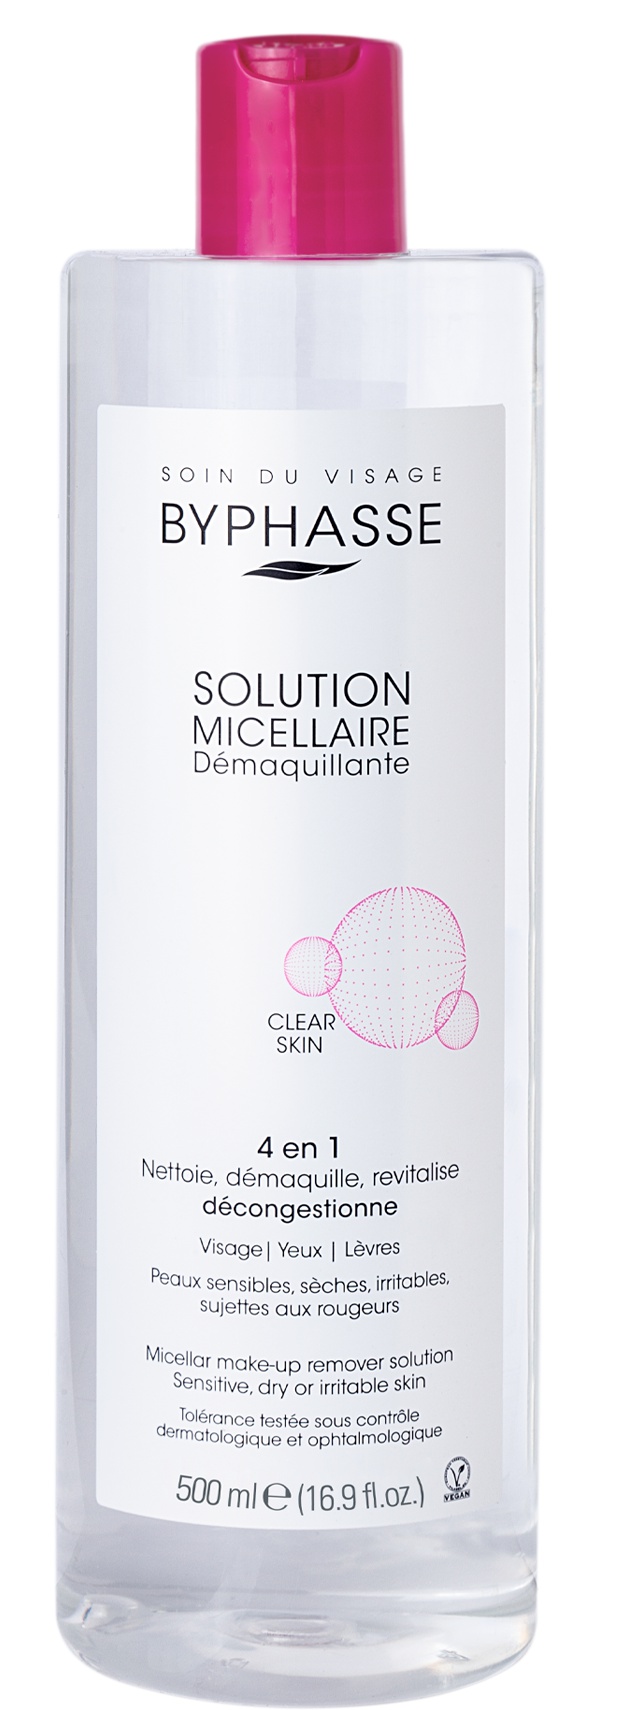 Byphasse Micellaire Makeup Remover Solution